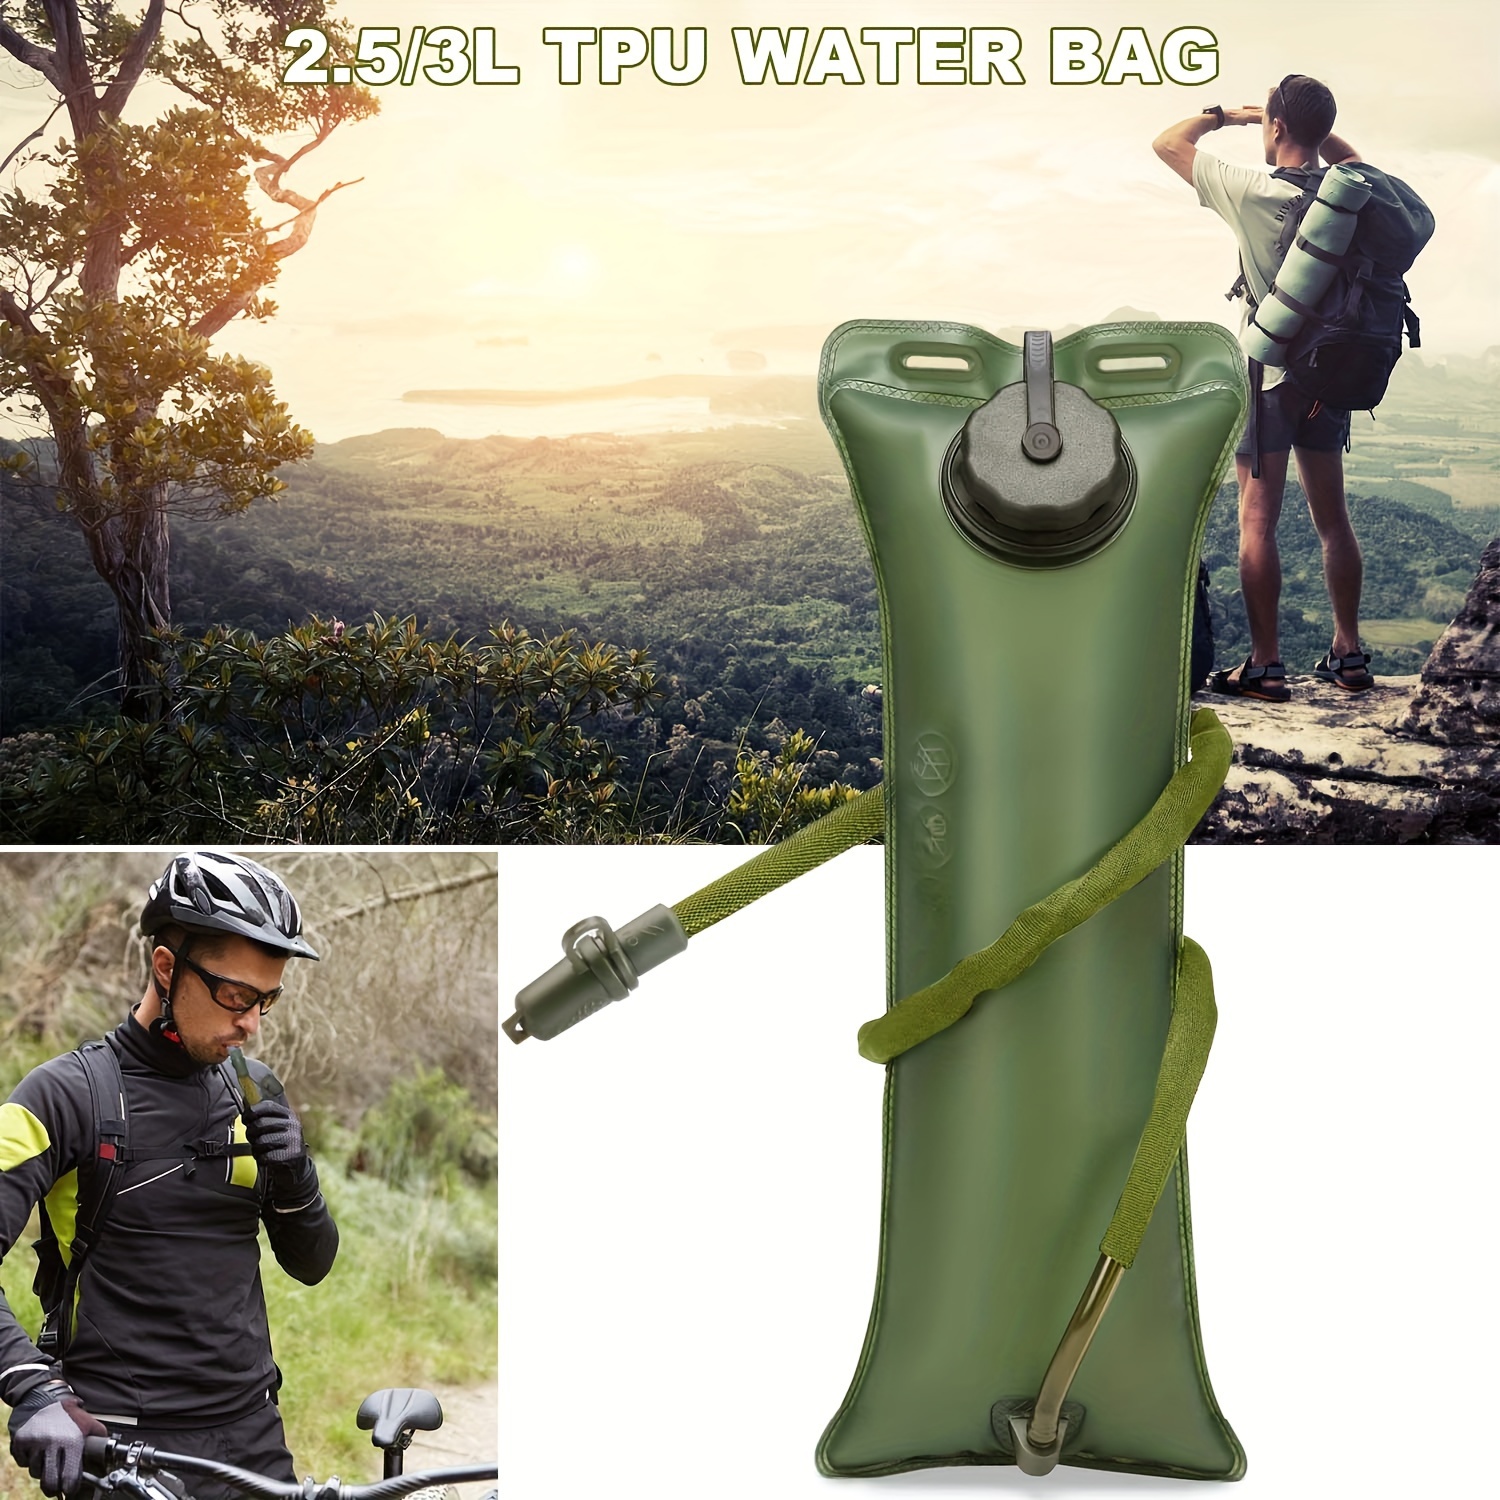 

1pc Hydration Bladder, 2.5l/3l Military Green Water Bladder For Hiking Backpack, Leak Proof Water Reservoir Storage Bag, Bpa-free Water Pouch Hydration Pack For Camping Cycling Running